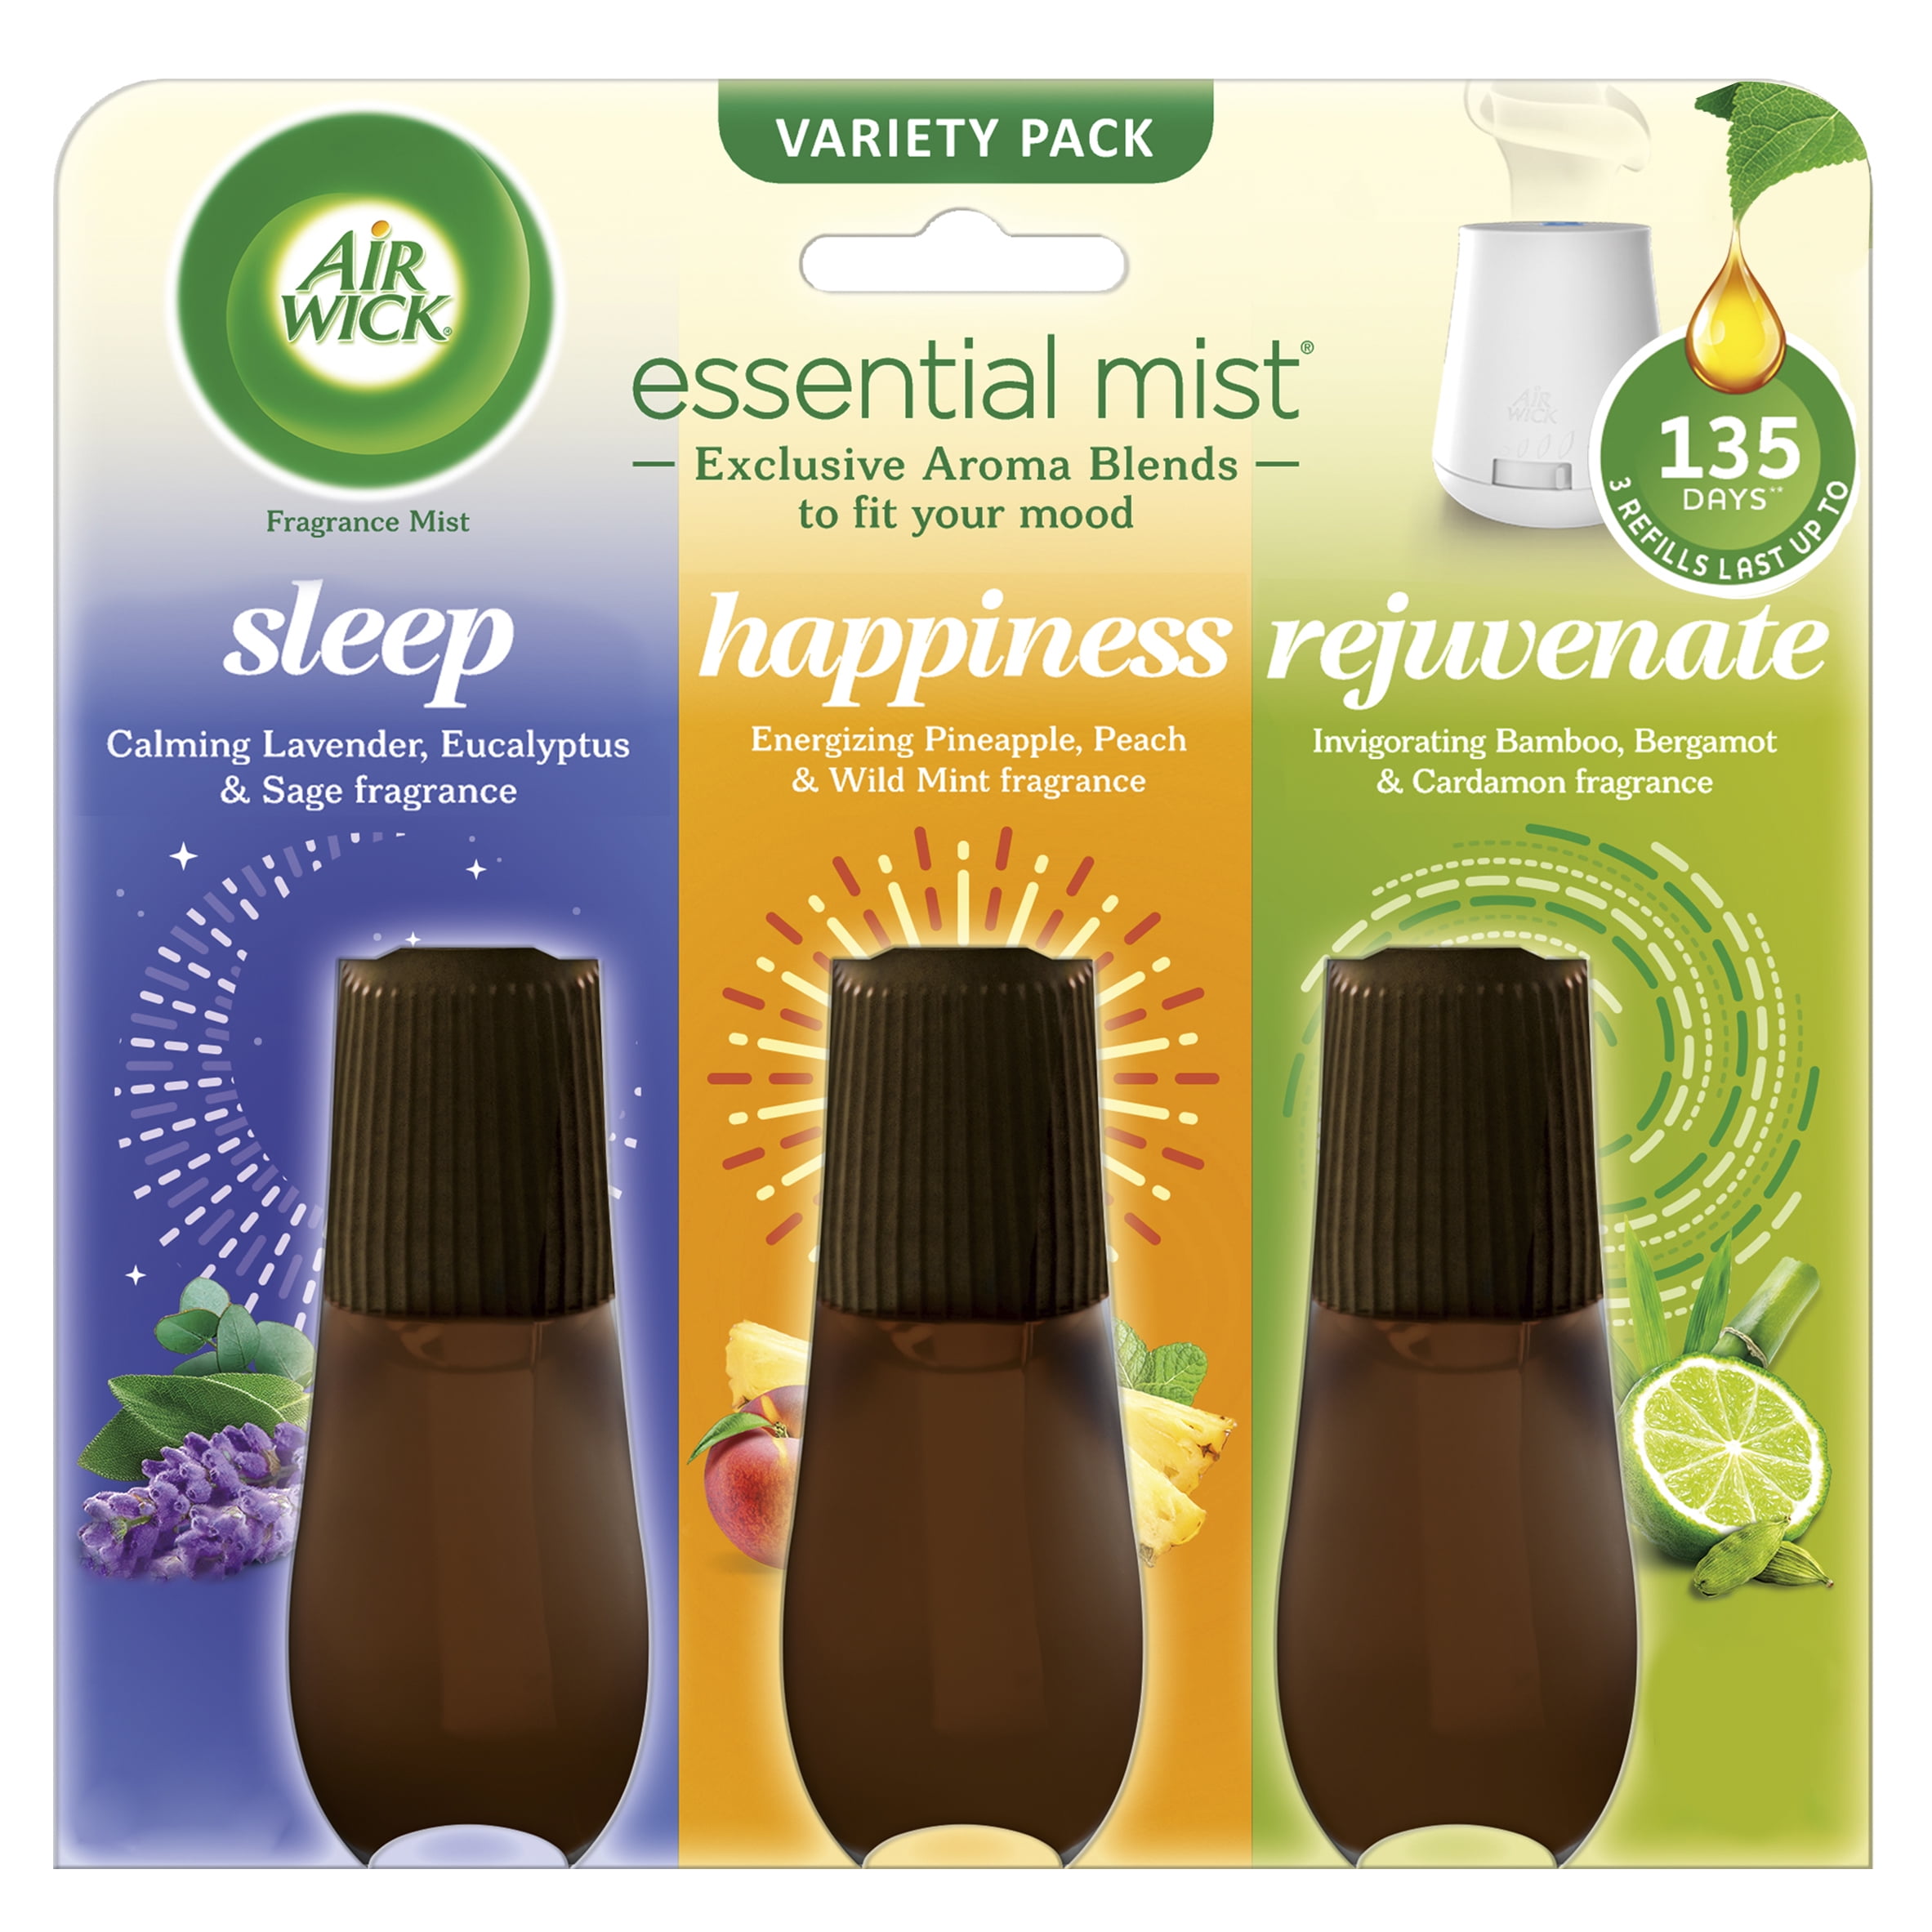  Air Wick Essential Mist Starter Kit (Diffuser + Refill),  Happiness, Essential Oils Diffuser, Air Freshener : Health & Household